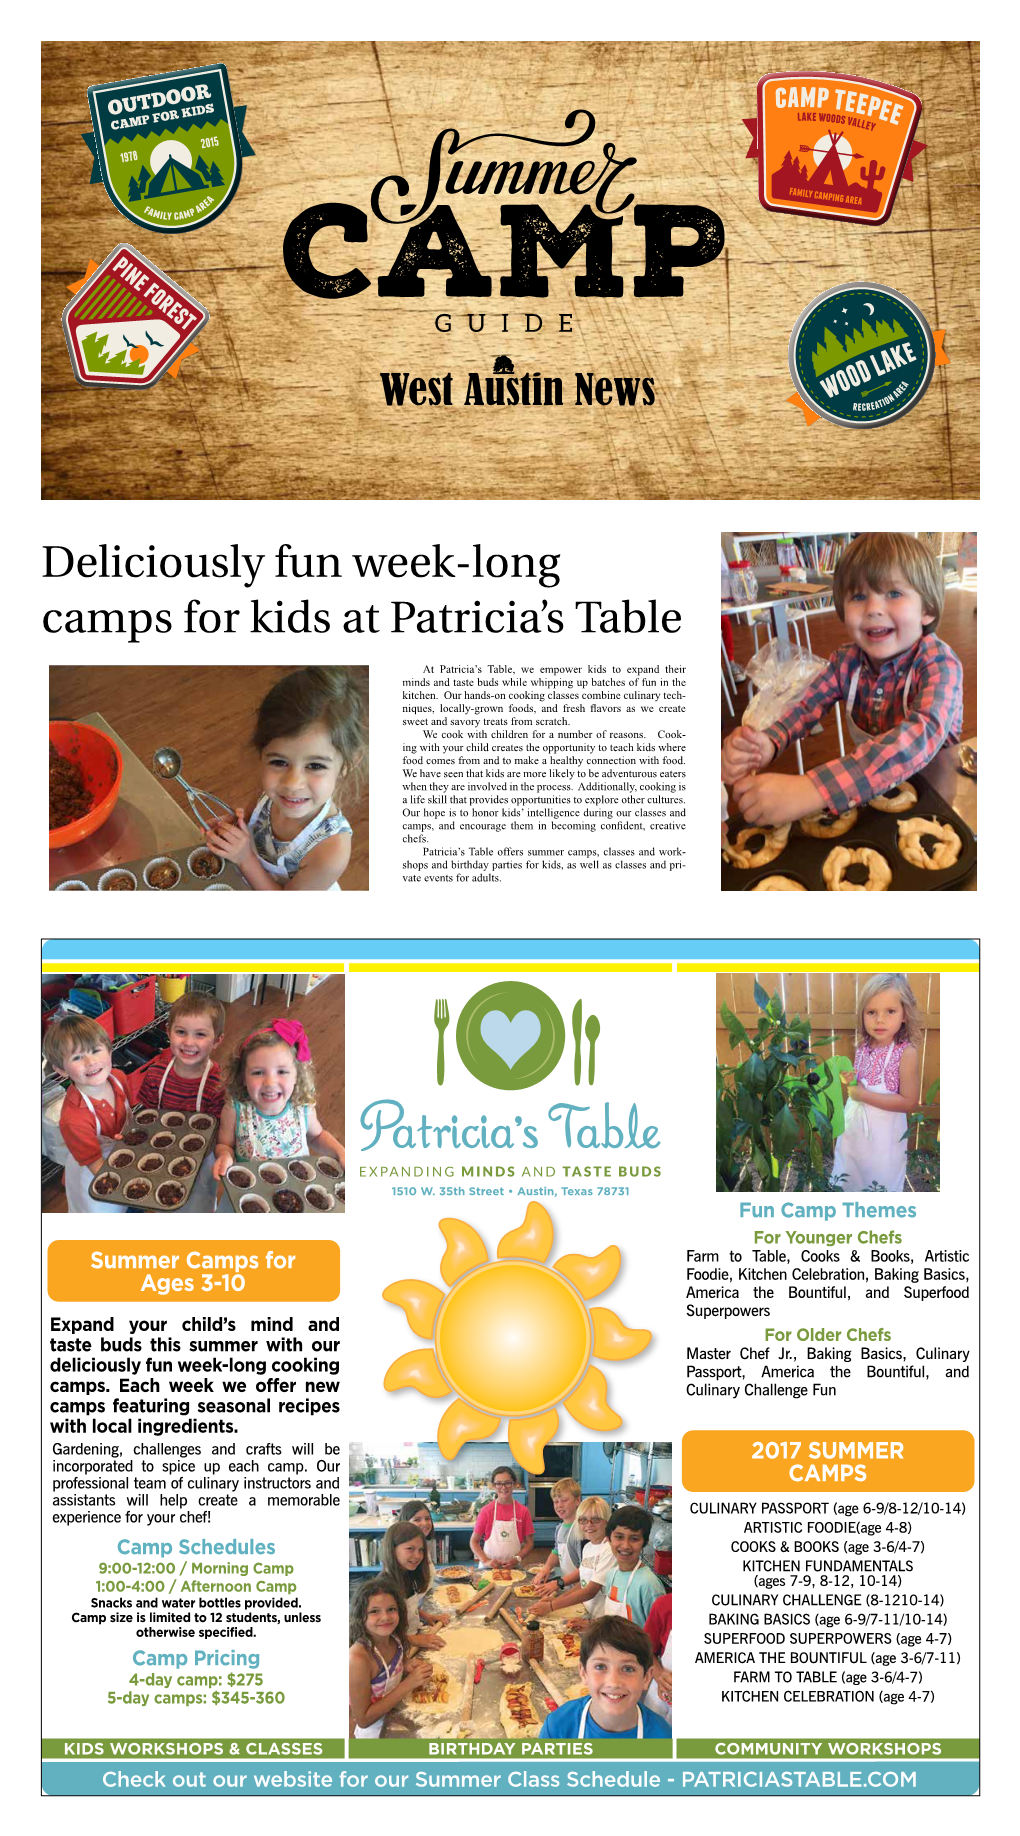 Deliciously Fun Week-Long Camps for Kids at Patricia's Table